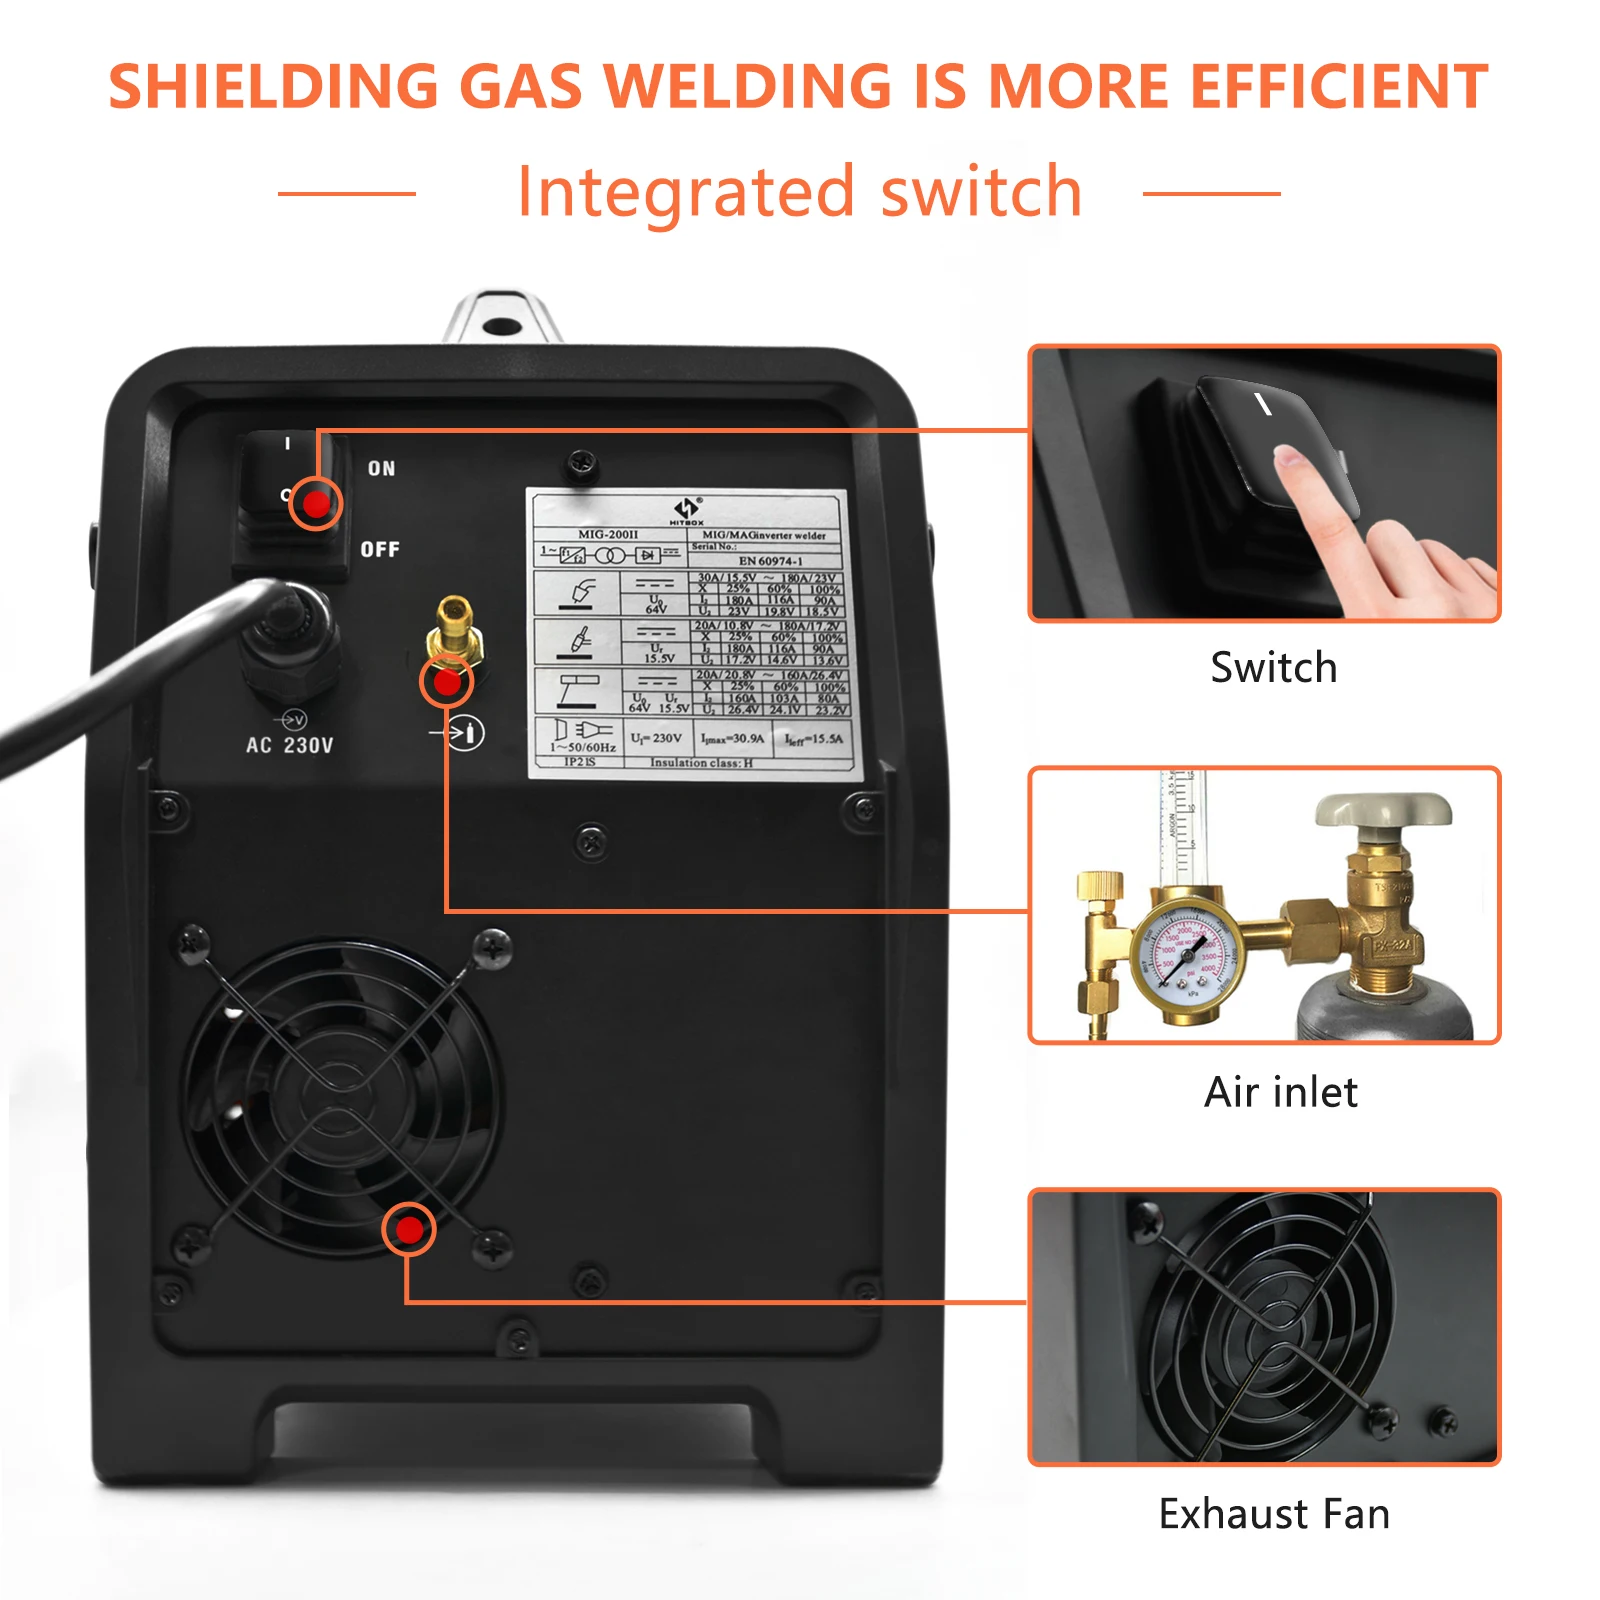 5 in 1 MIG200 HITBOX Stainless Steel Iron Mig Welder Semi-Automatic ARC TIG MIG Aluminum Welding Machine DC Gas and Gasless